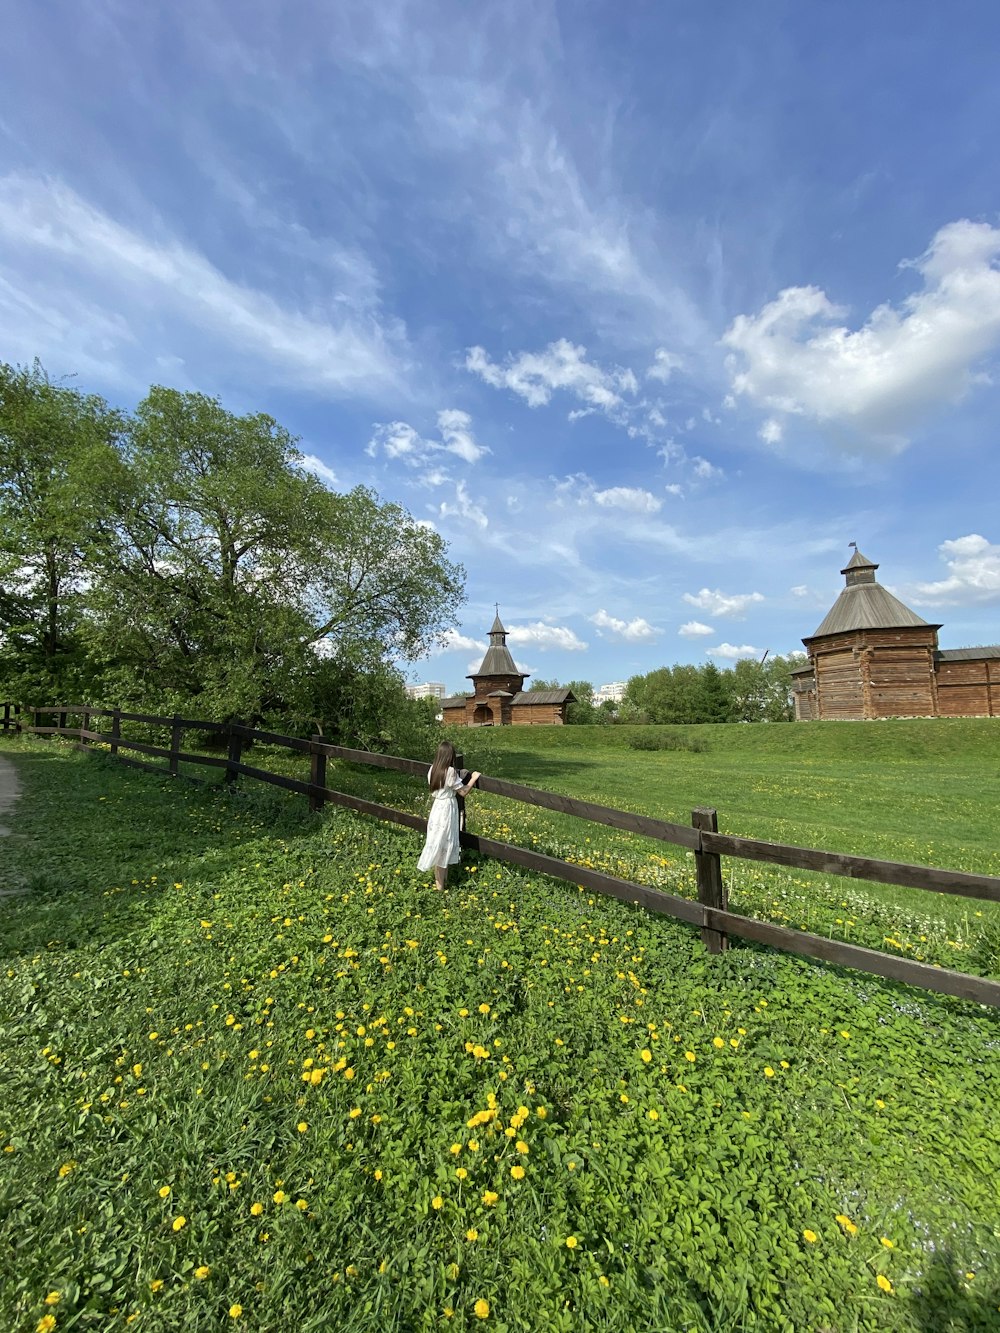 man in white robe walking on green grass field near brown wooden fence during daytime